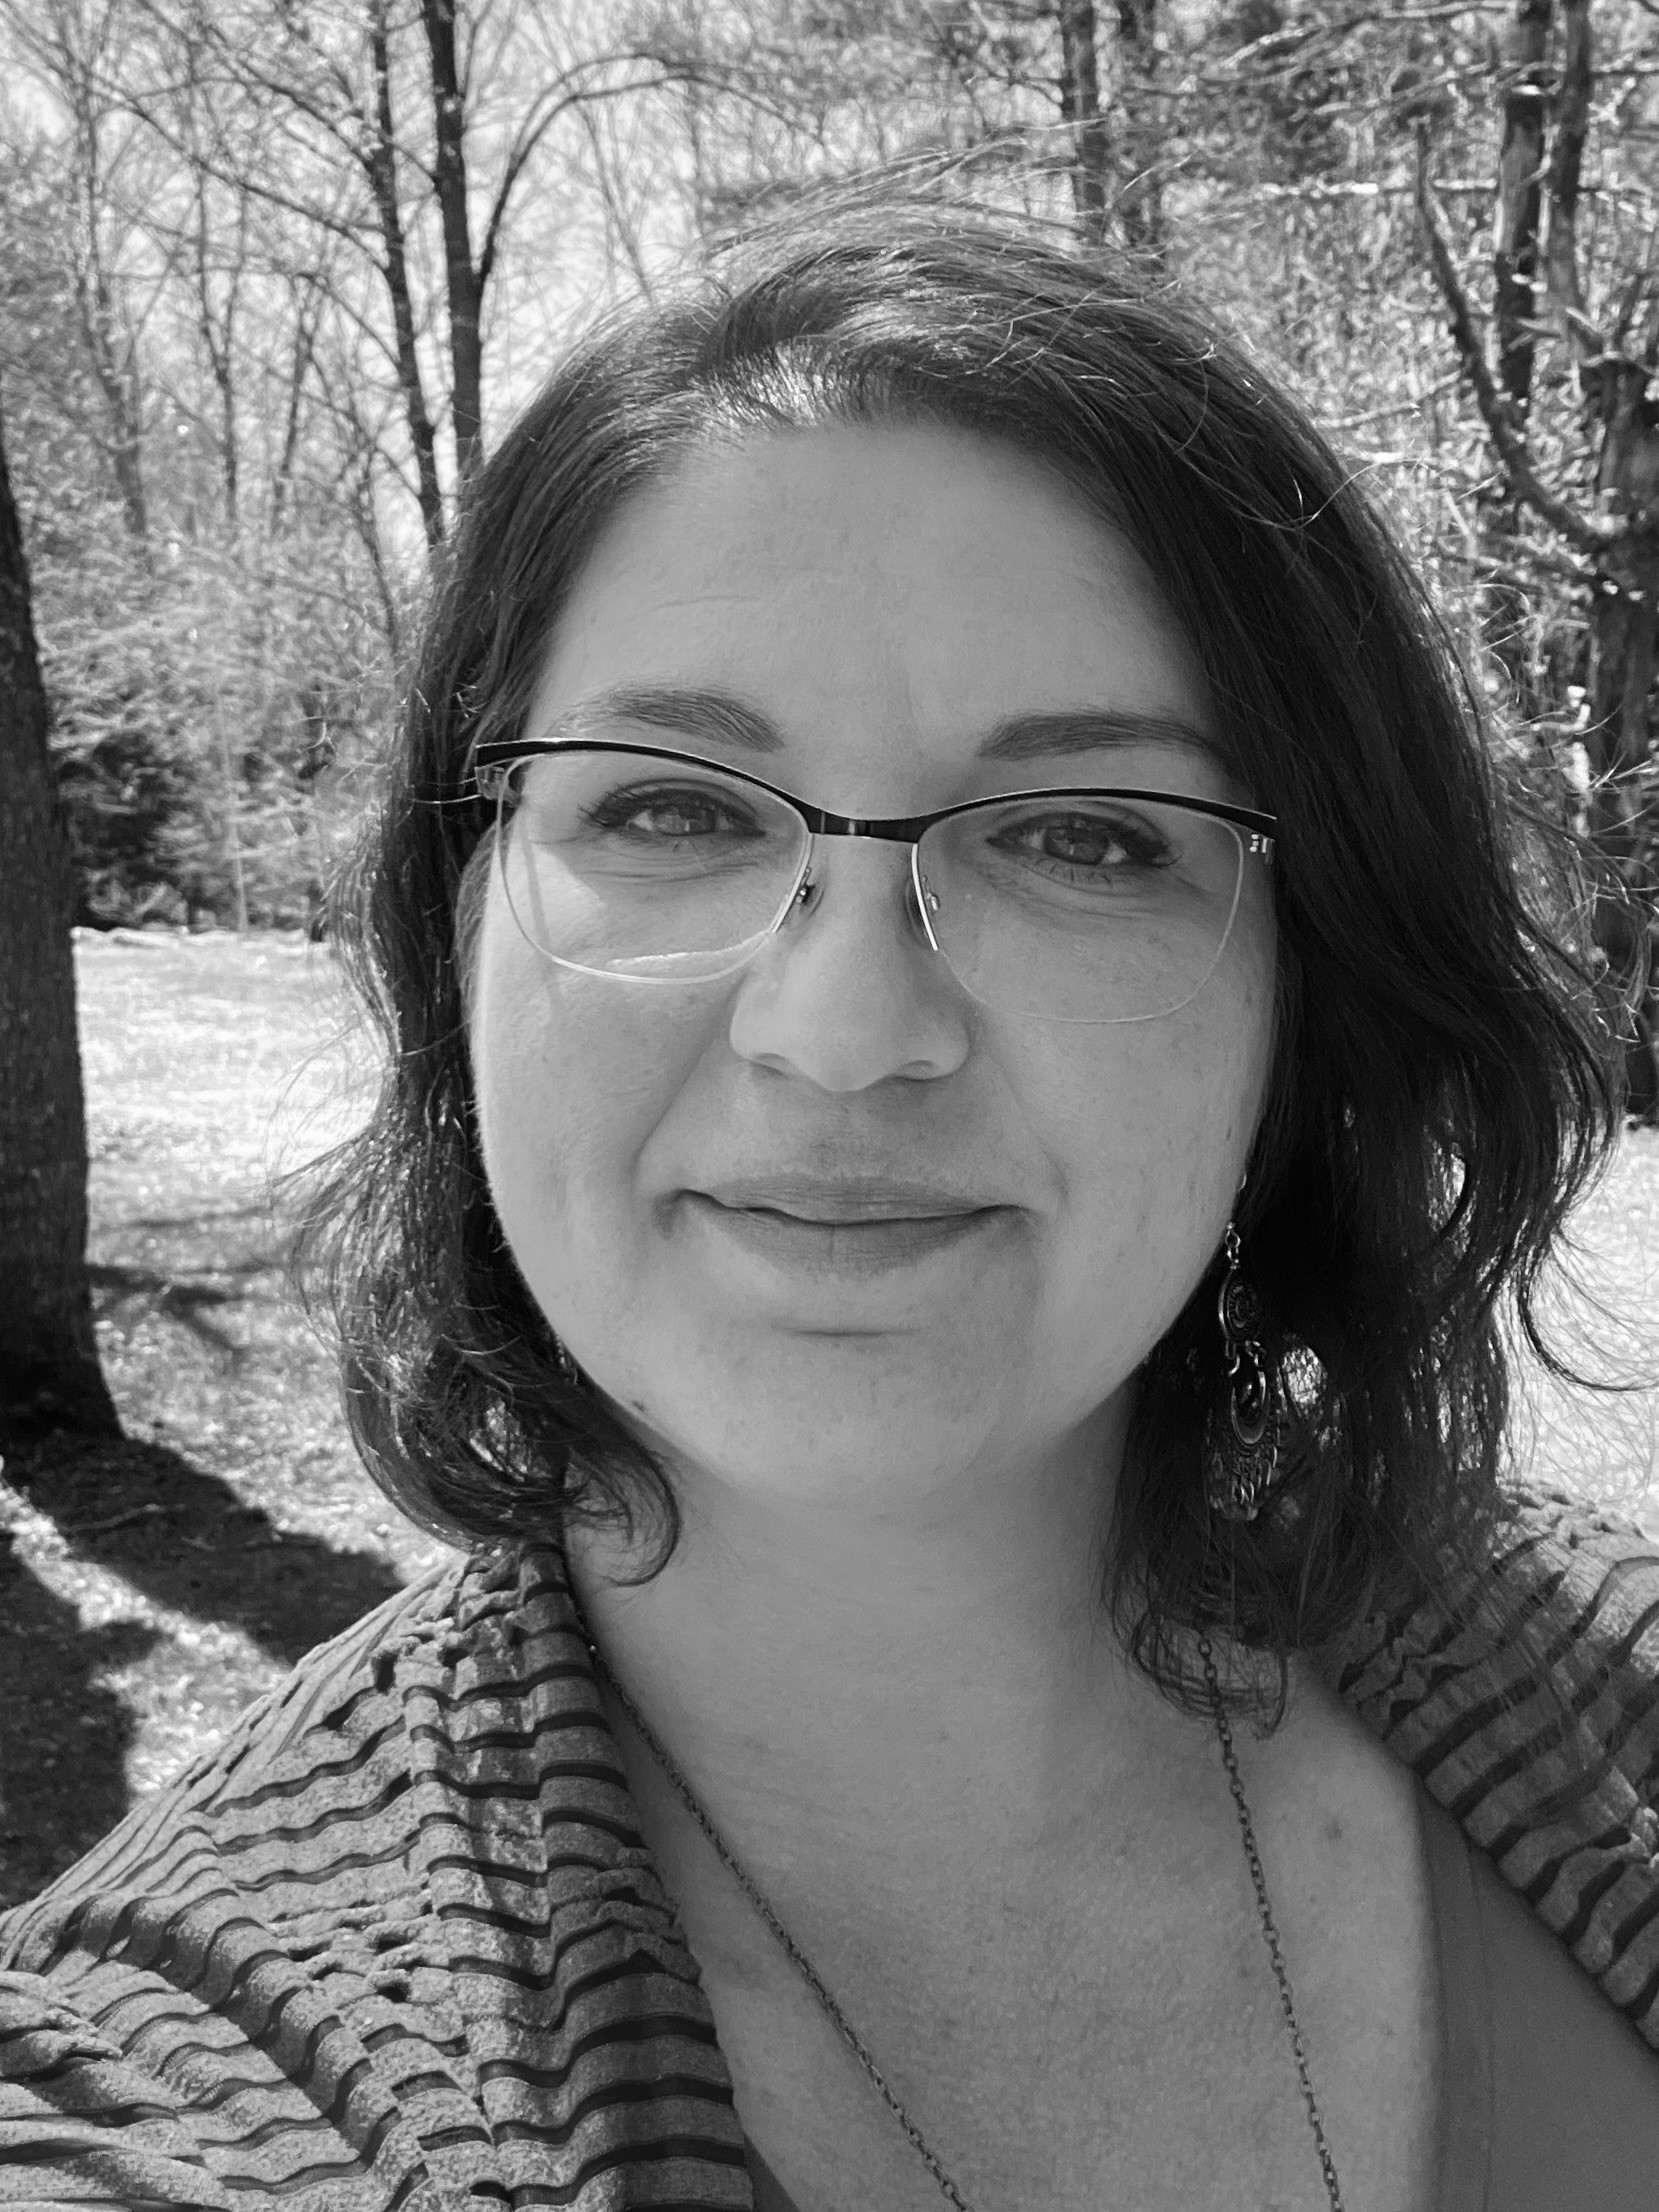 black & white photo of white female with glasses and nice smile